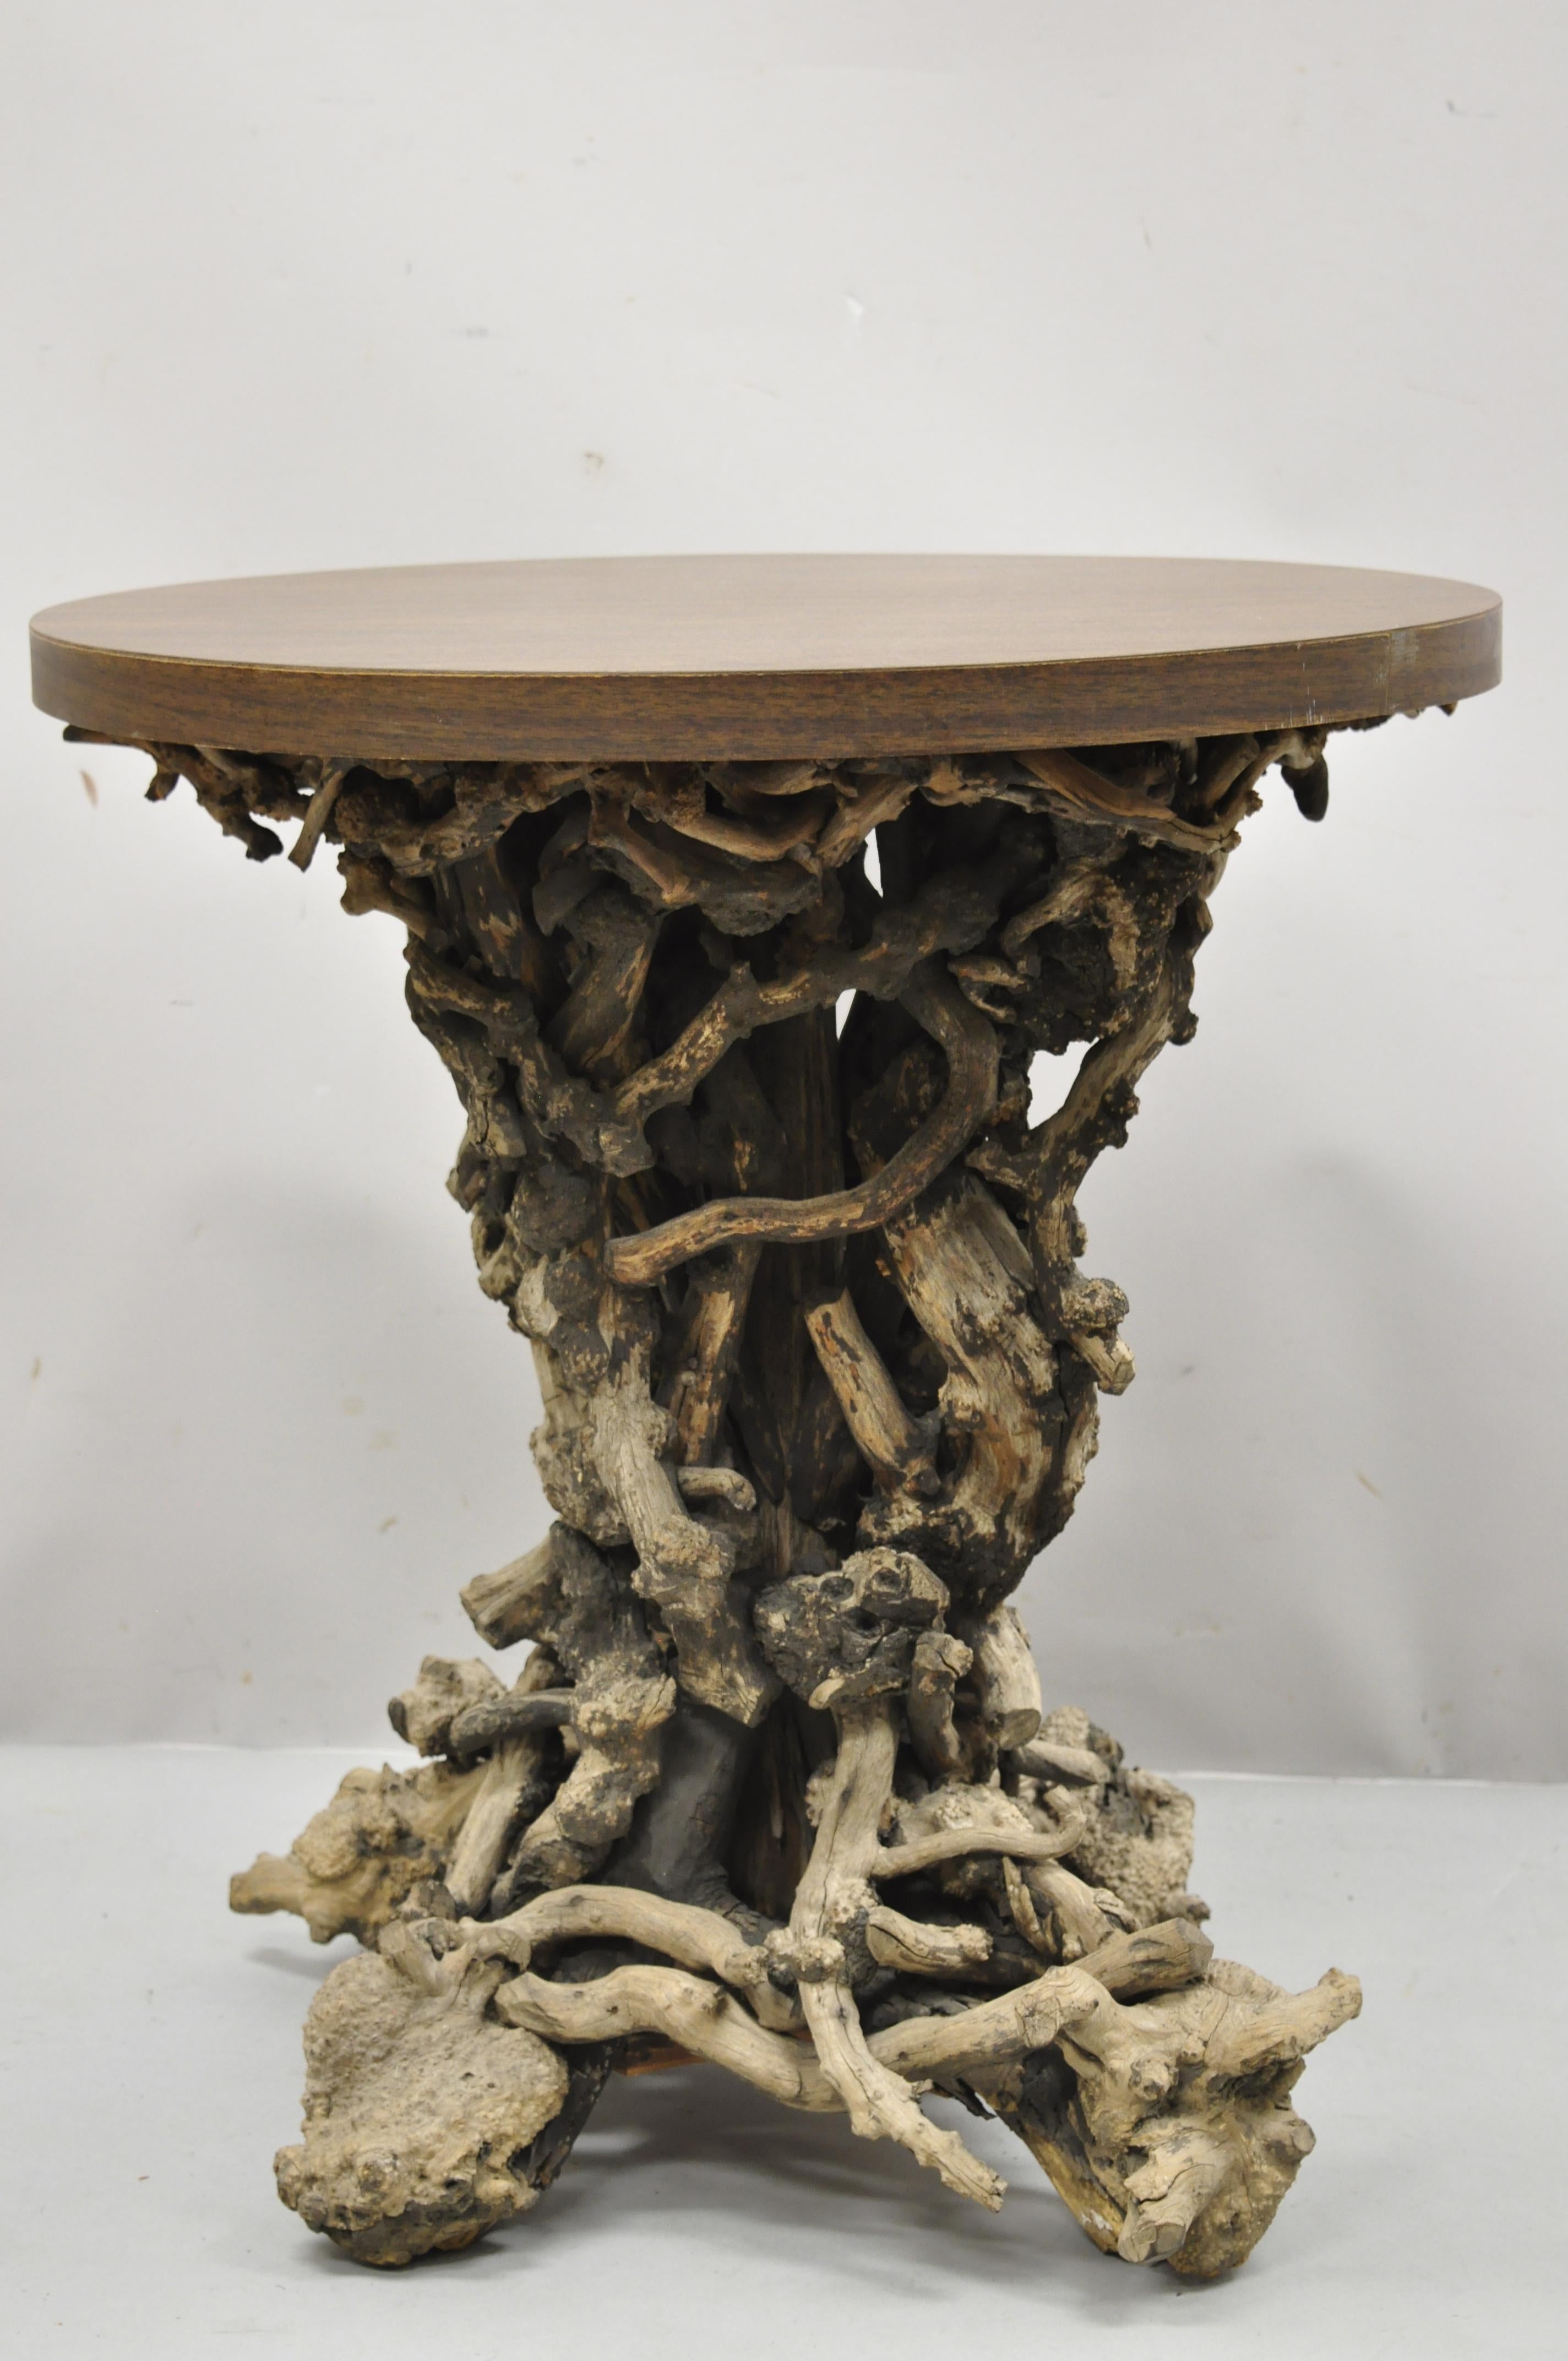 Vintage driftwood root base drift wood pedestal base naturalistic round accent side table. Item features round laminated top, driftwood free form root pedestal base, very nice vintage item, great style and form, Circa Mid 20th century. Measurements: